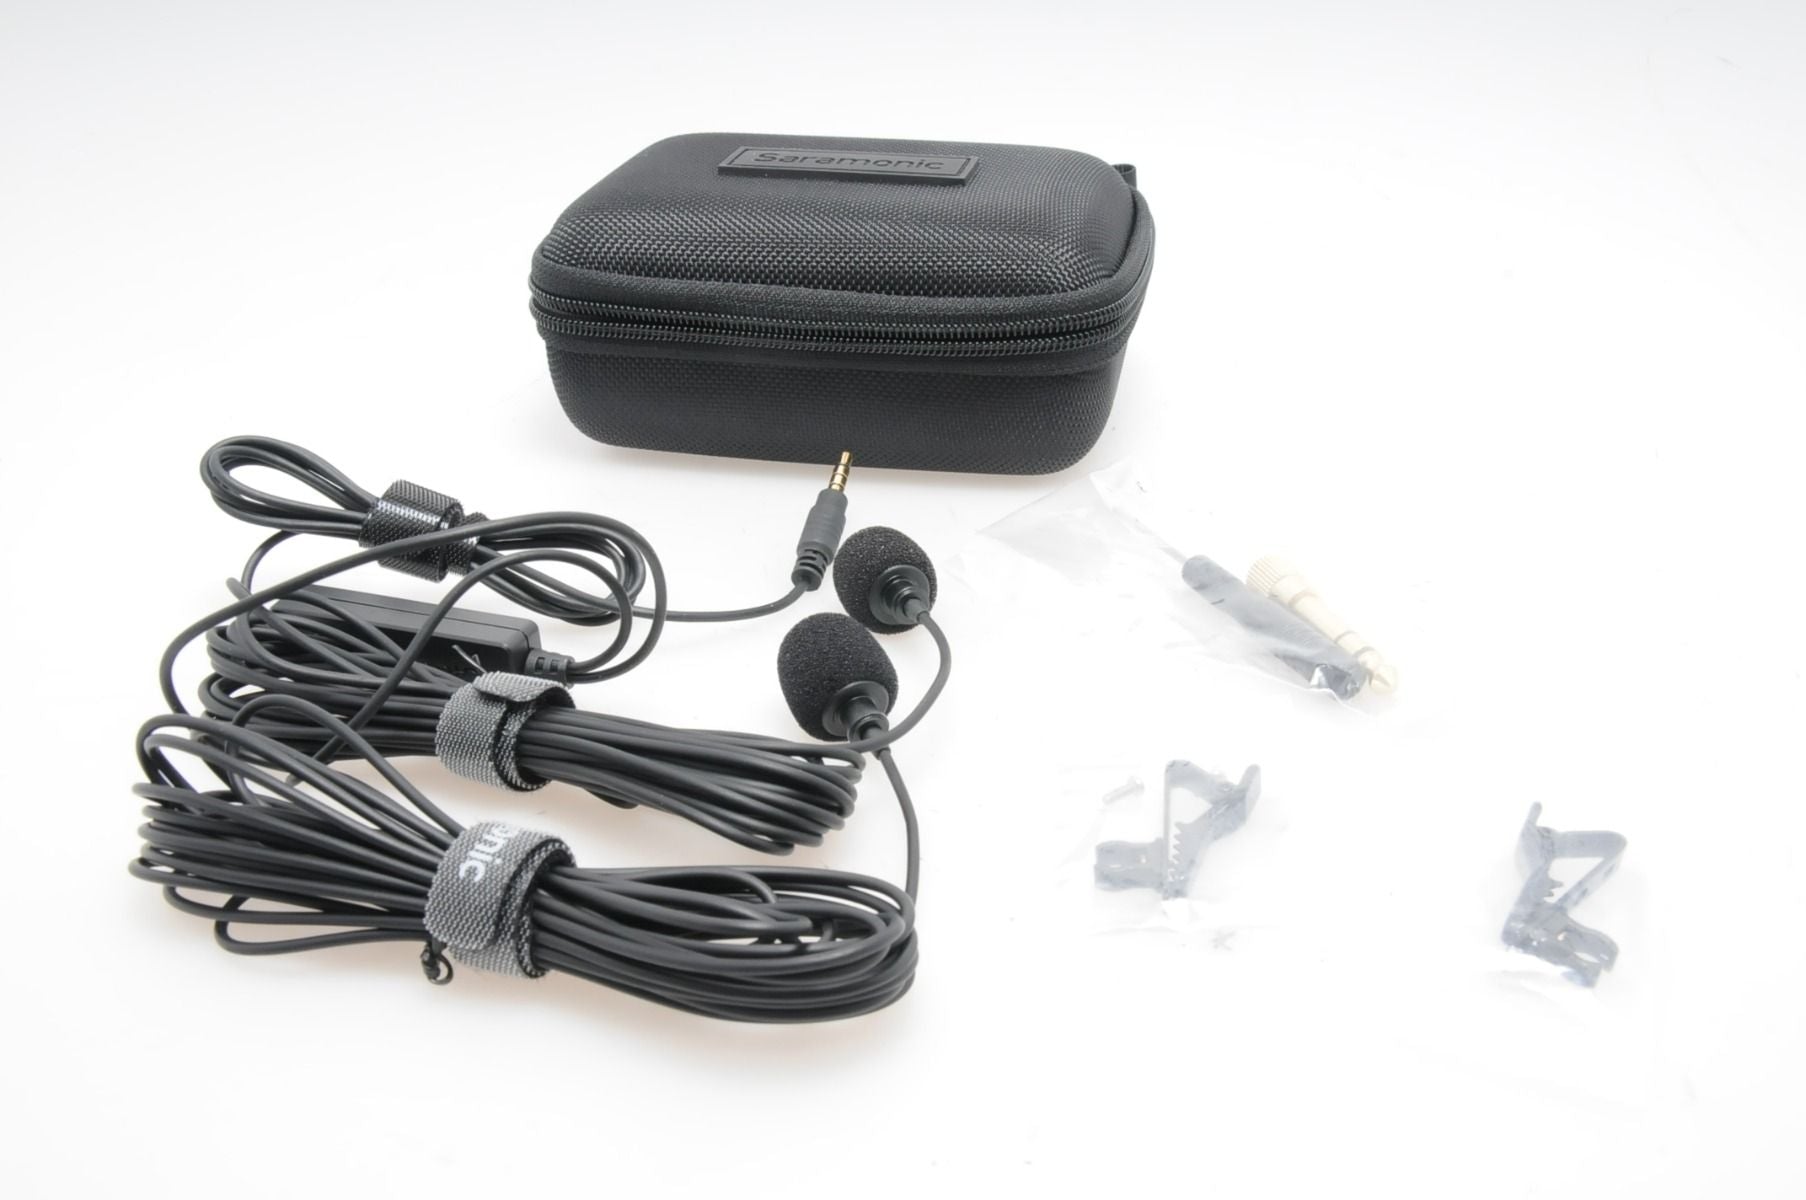 Used Saramonic Lavalier Microphone for DSLR cameras (Boxed SH36705)